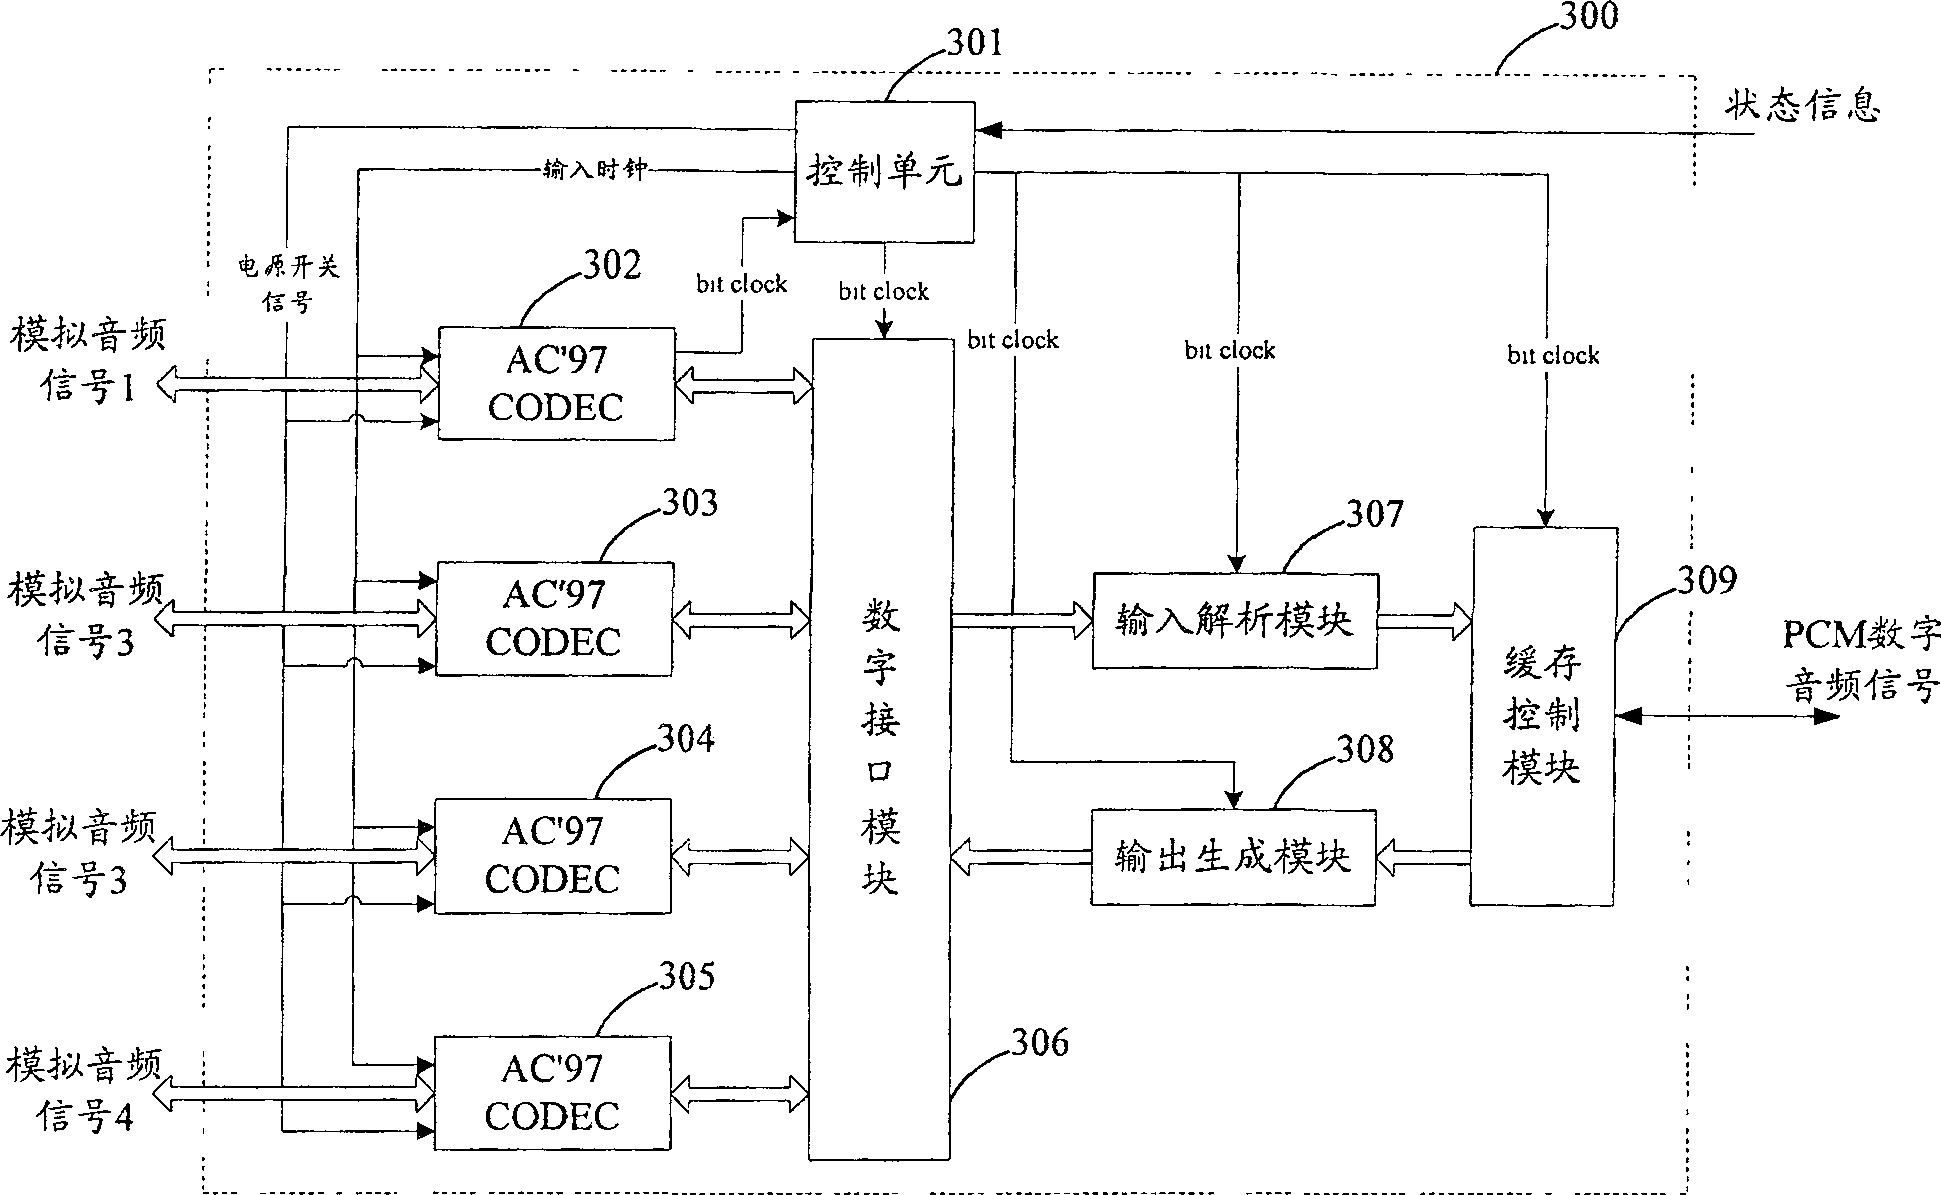 Digital audio frequency controller